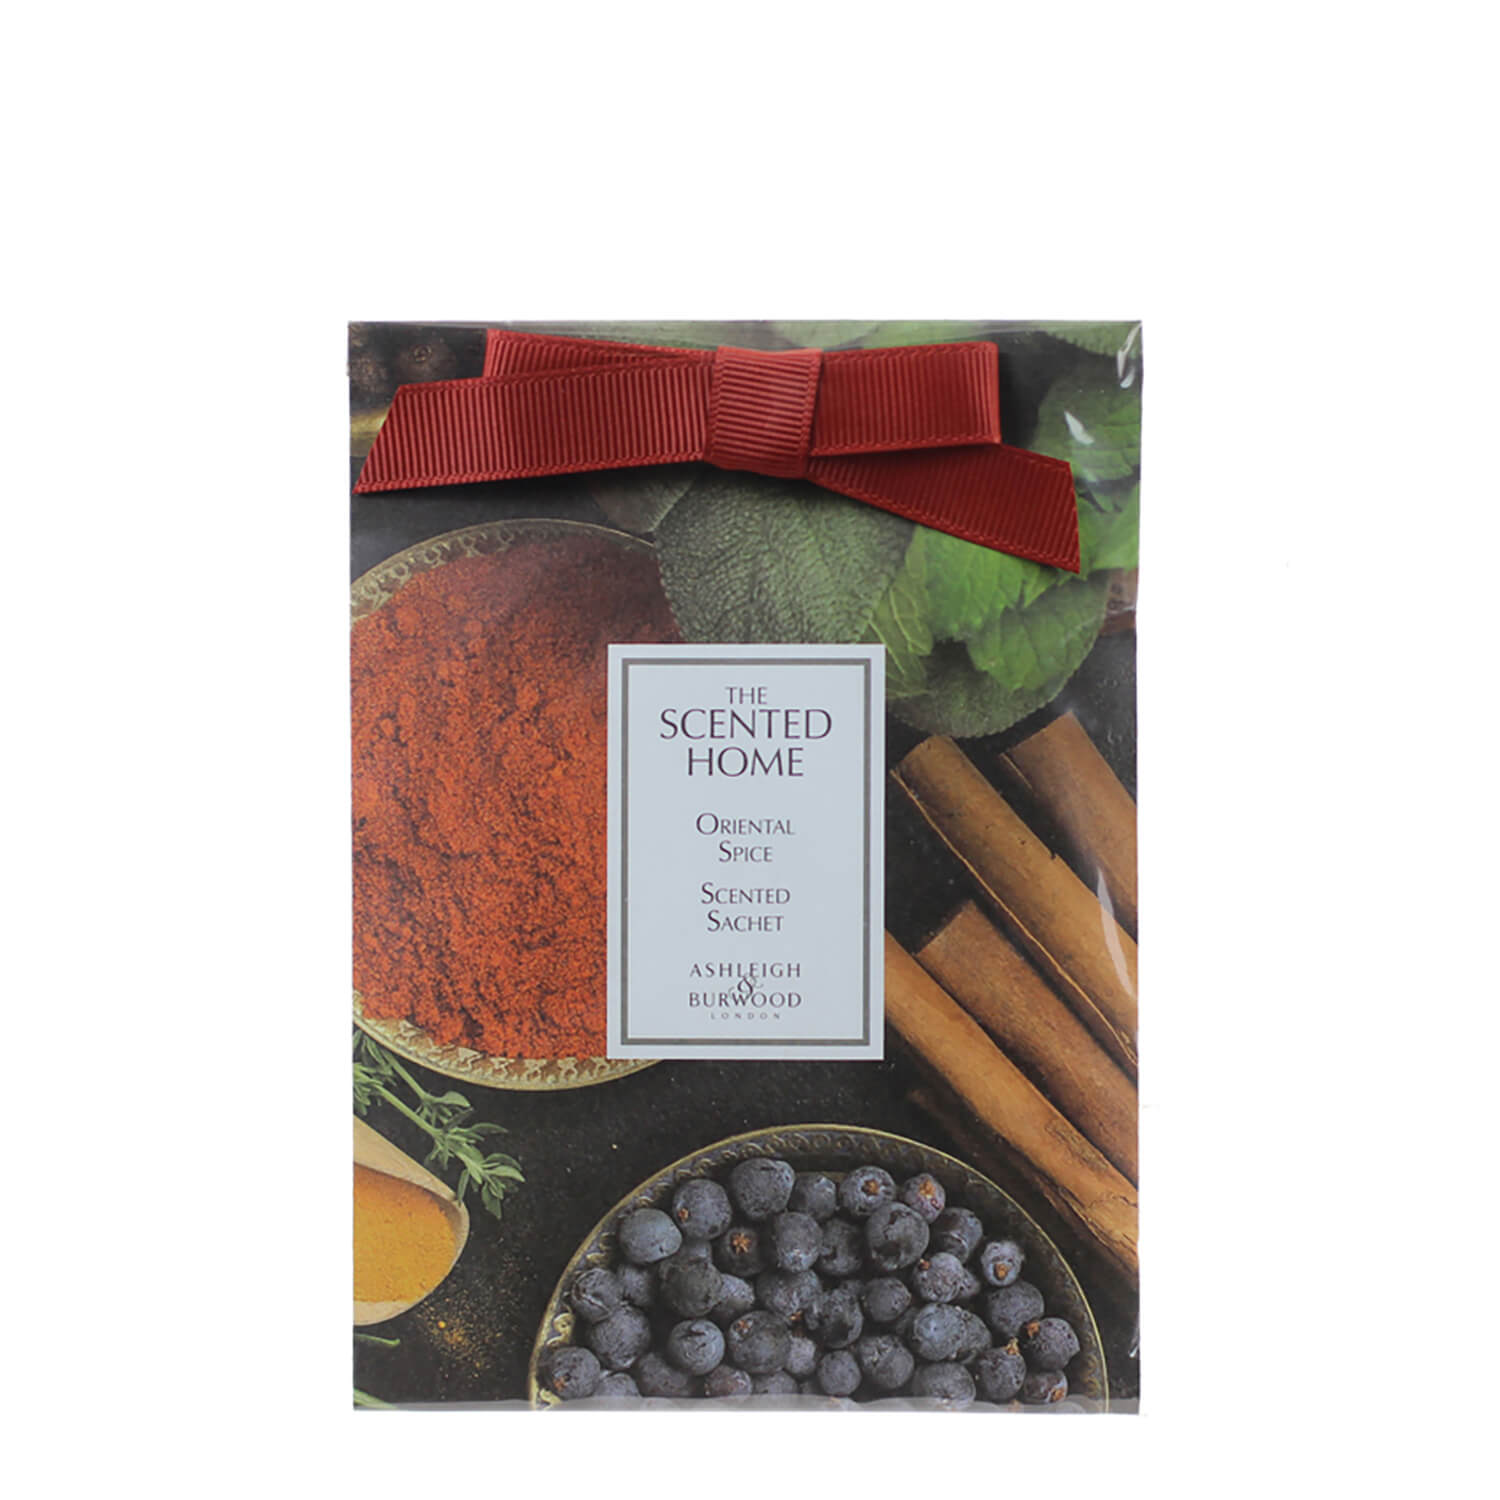 Ashleigh &amp; Burwood Scented Home Scented Sachet - Oriental Spice 1 Shaws Department Stores